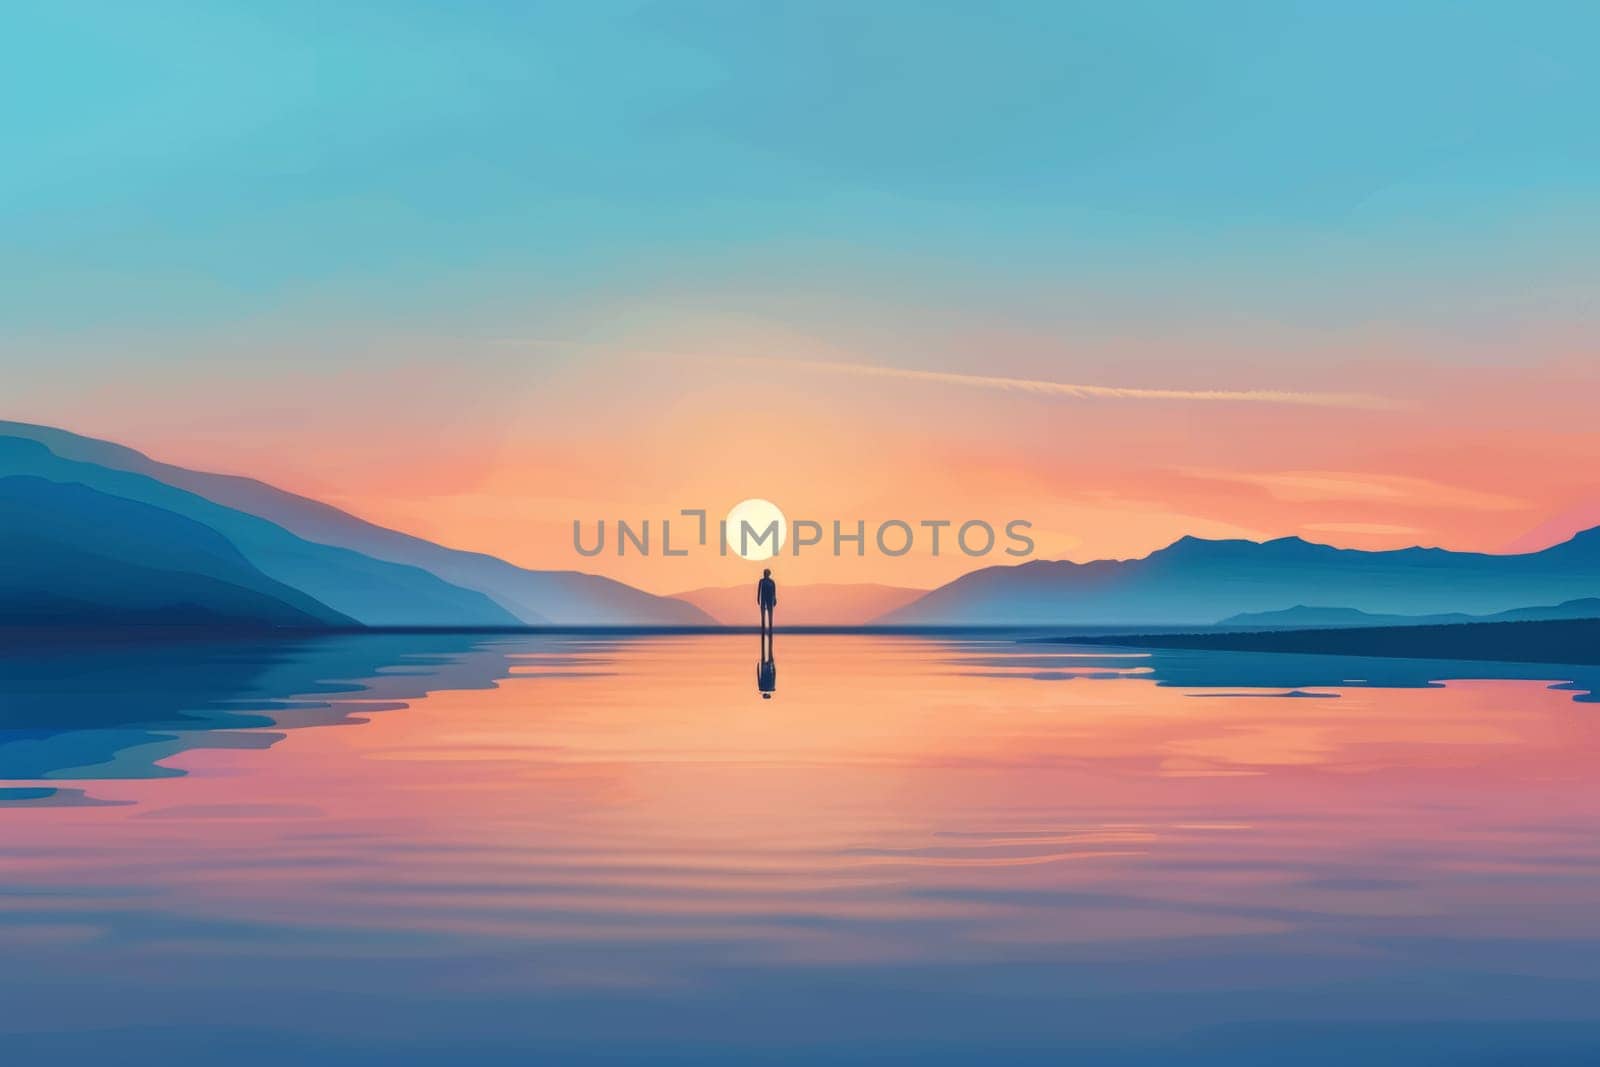 Solitary Figure at Lakeside Sunset by andreyz